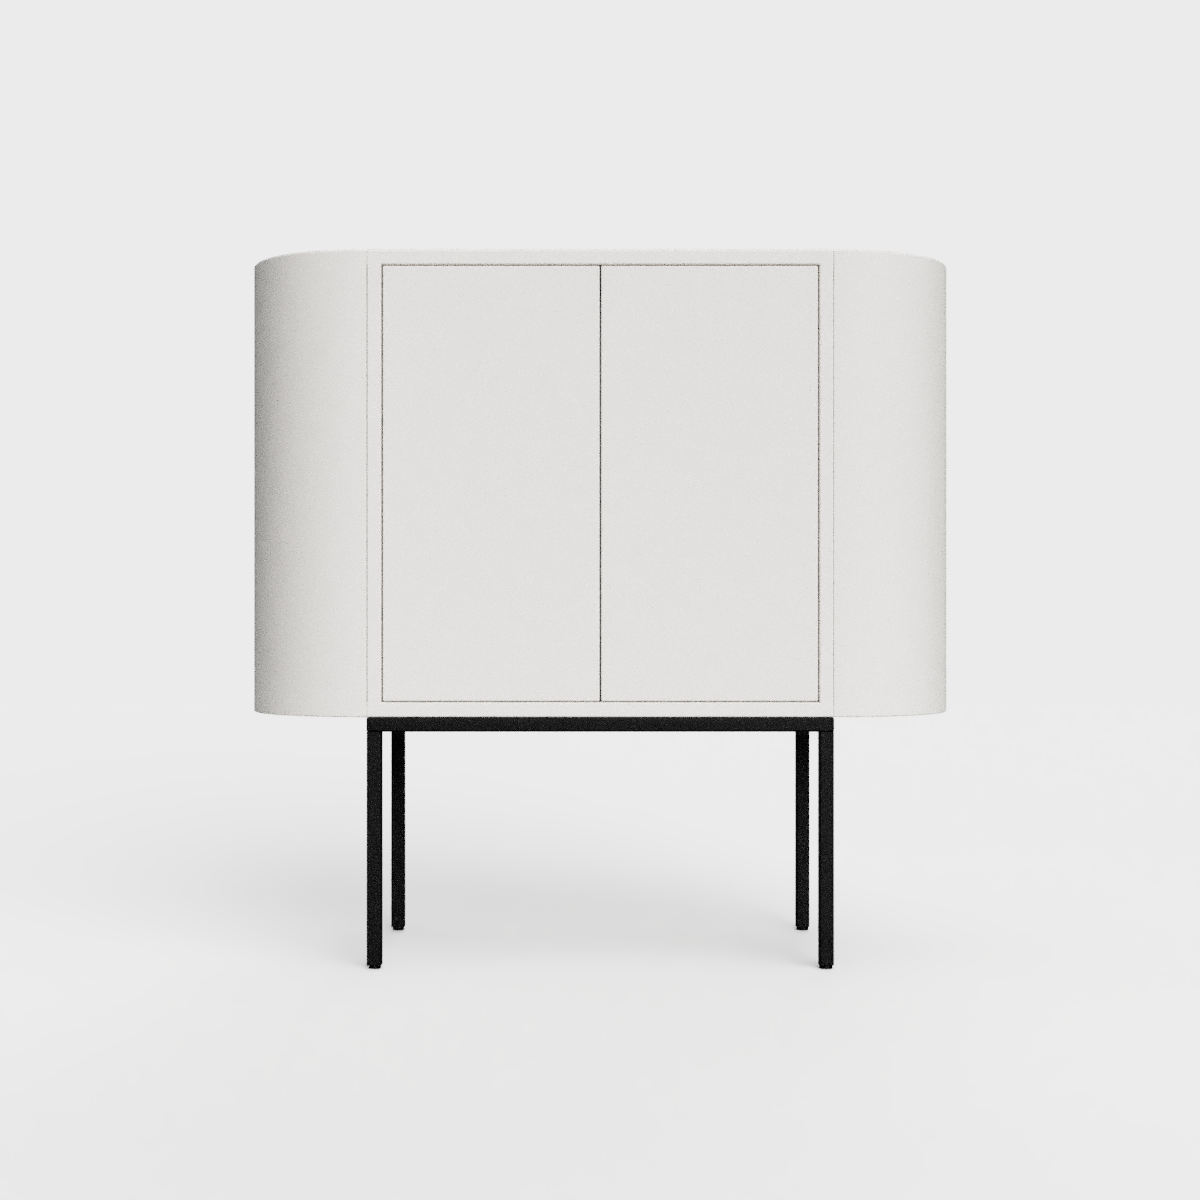 Siena 01 Sideboard in White color, powder-coated steel, elegant and modern piece of furniture for your living room